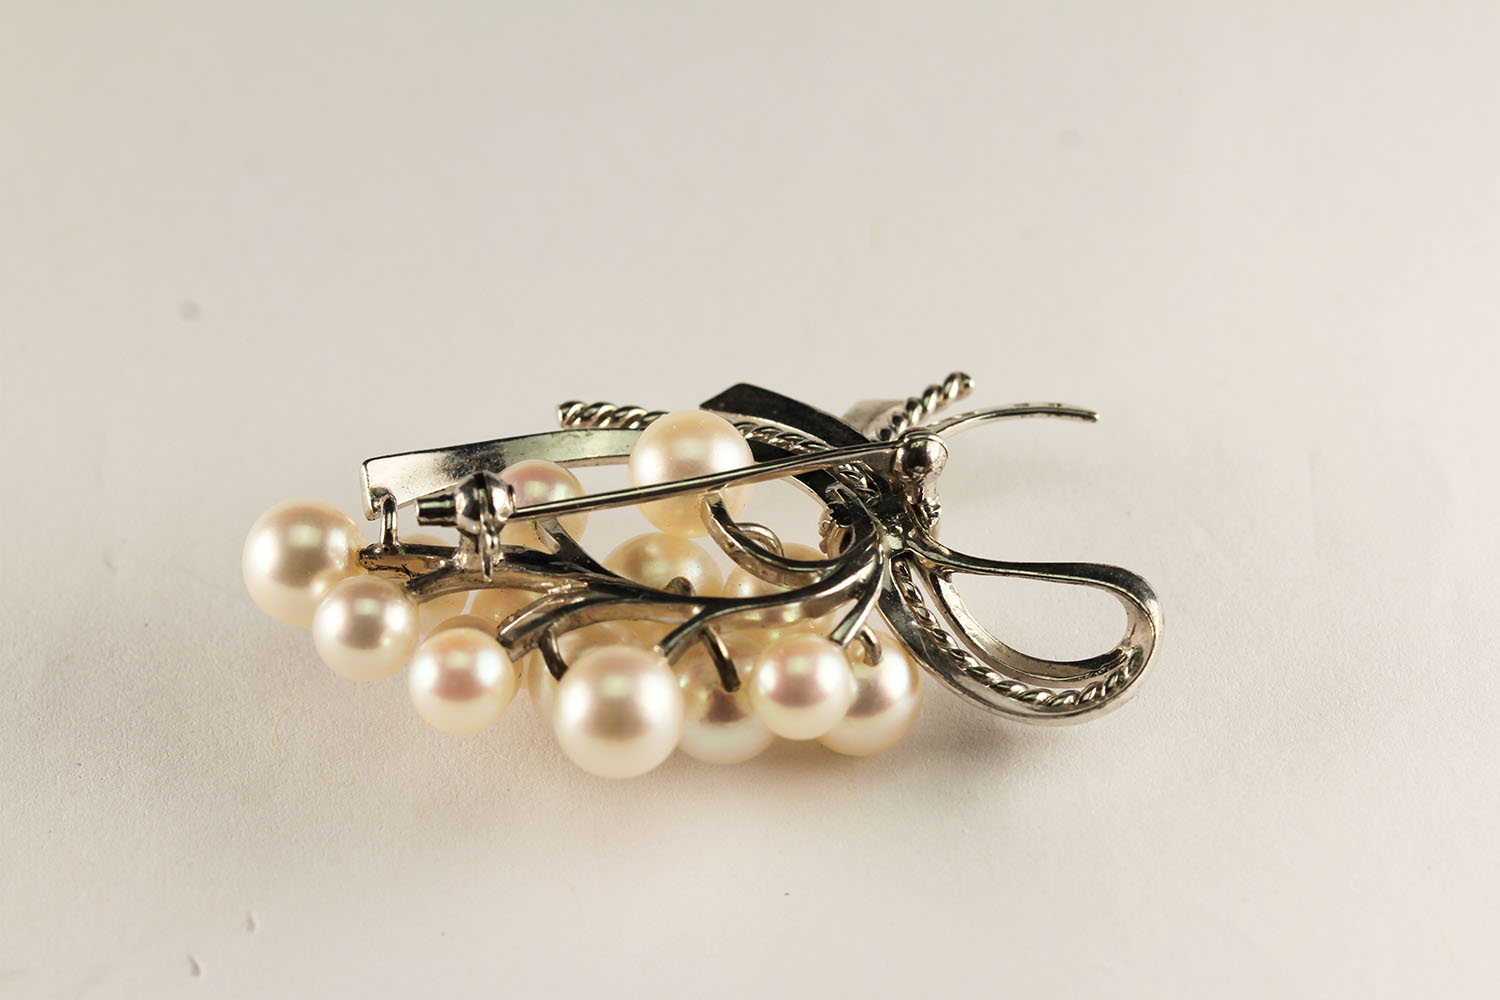 SILVER VINTAGE MIKIMOTO PEARL BROOCH, dimensions 45x25mms , set with 15 stones of various sizes - Image 2 of 2